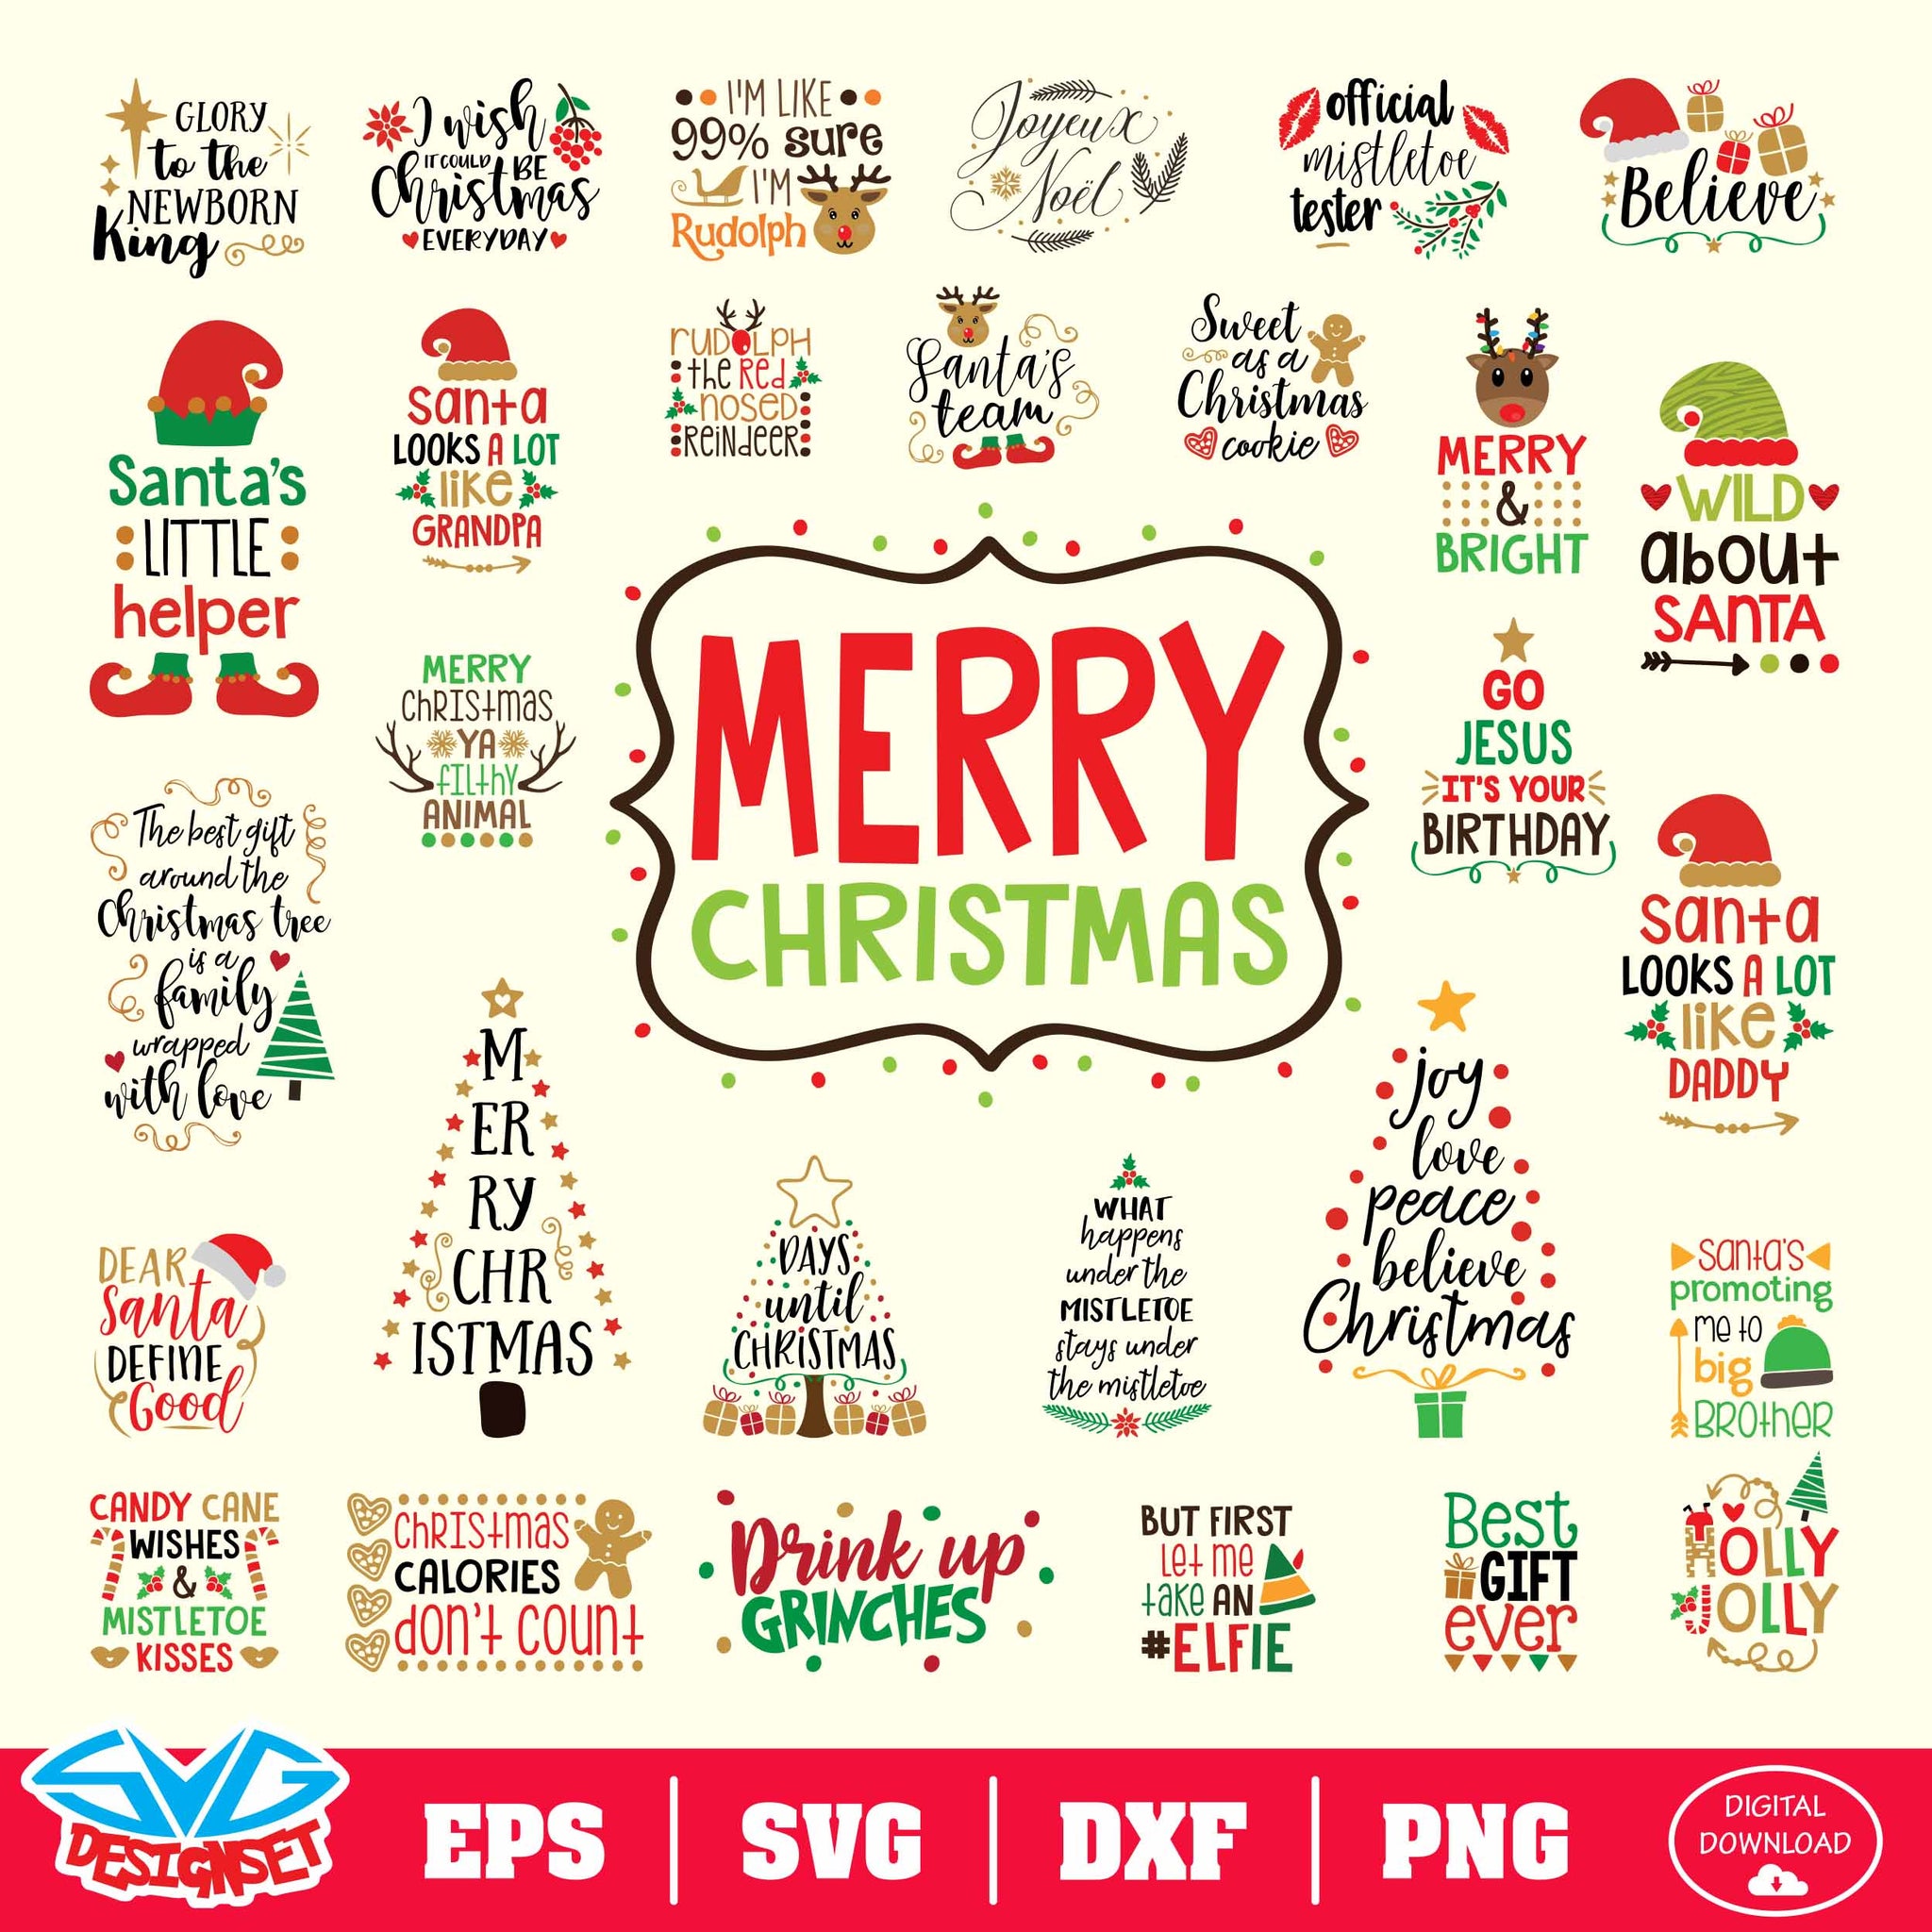 Christmas Bundle Svg, Dxf, Eps, Png, Clipart, Silhouette and Cutfiles #011 - SVGDesignSets